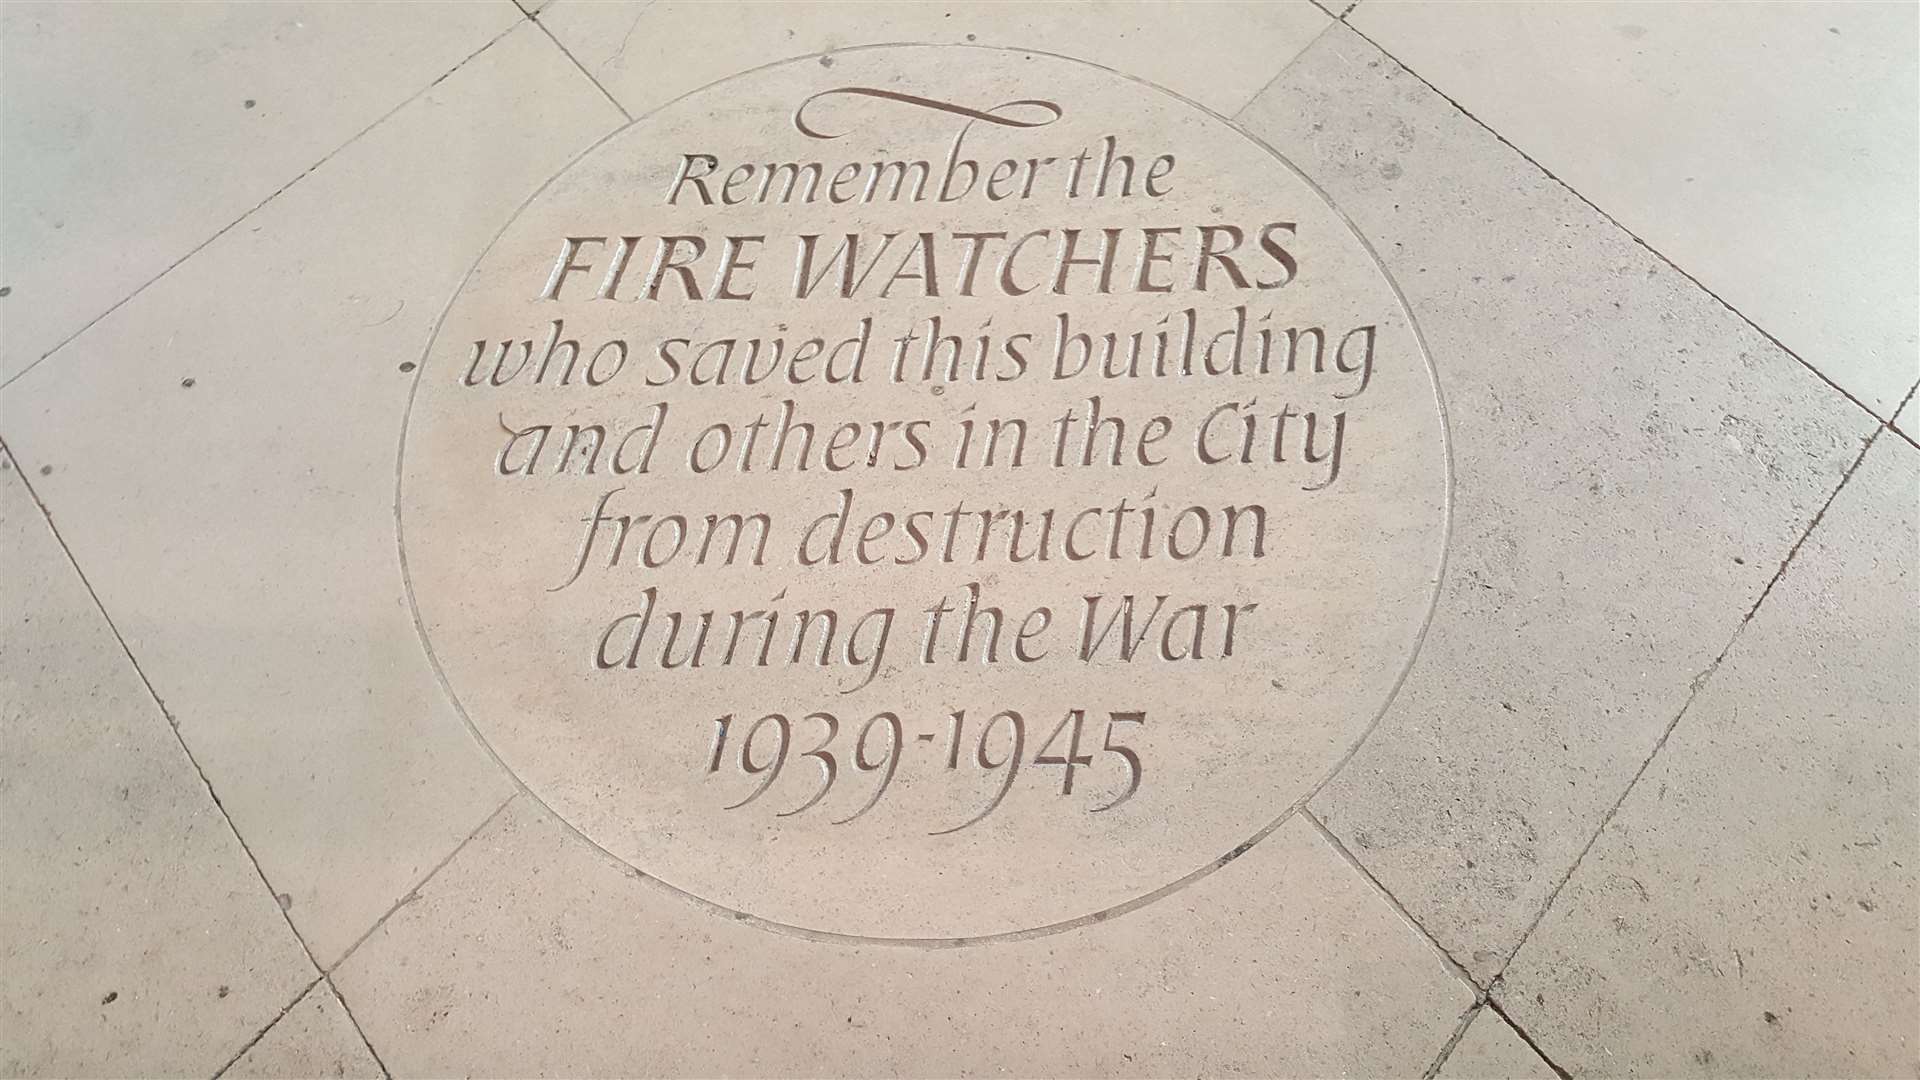 The memorial plaque to the fire watchers at Canterbury Cathedral